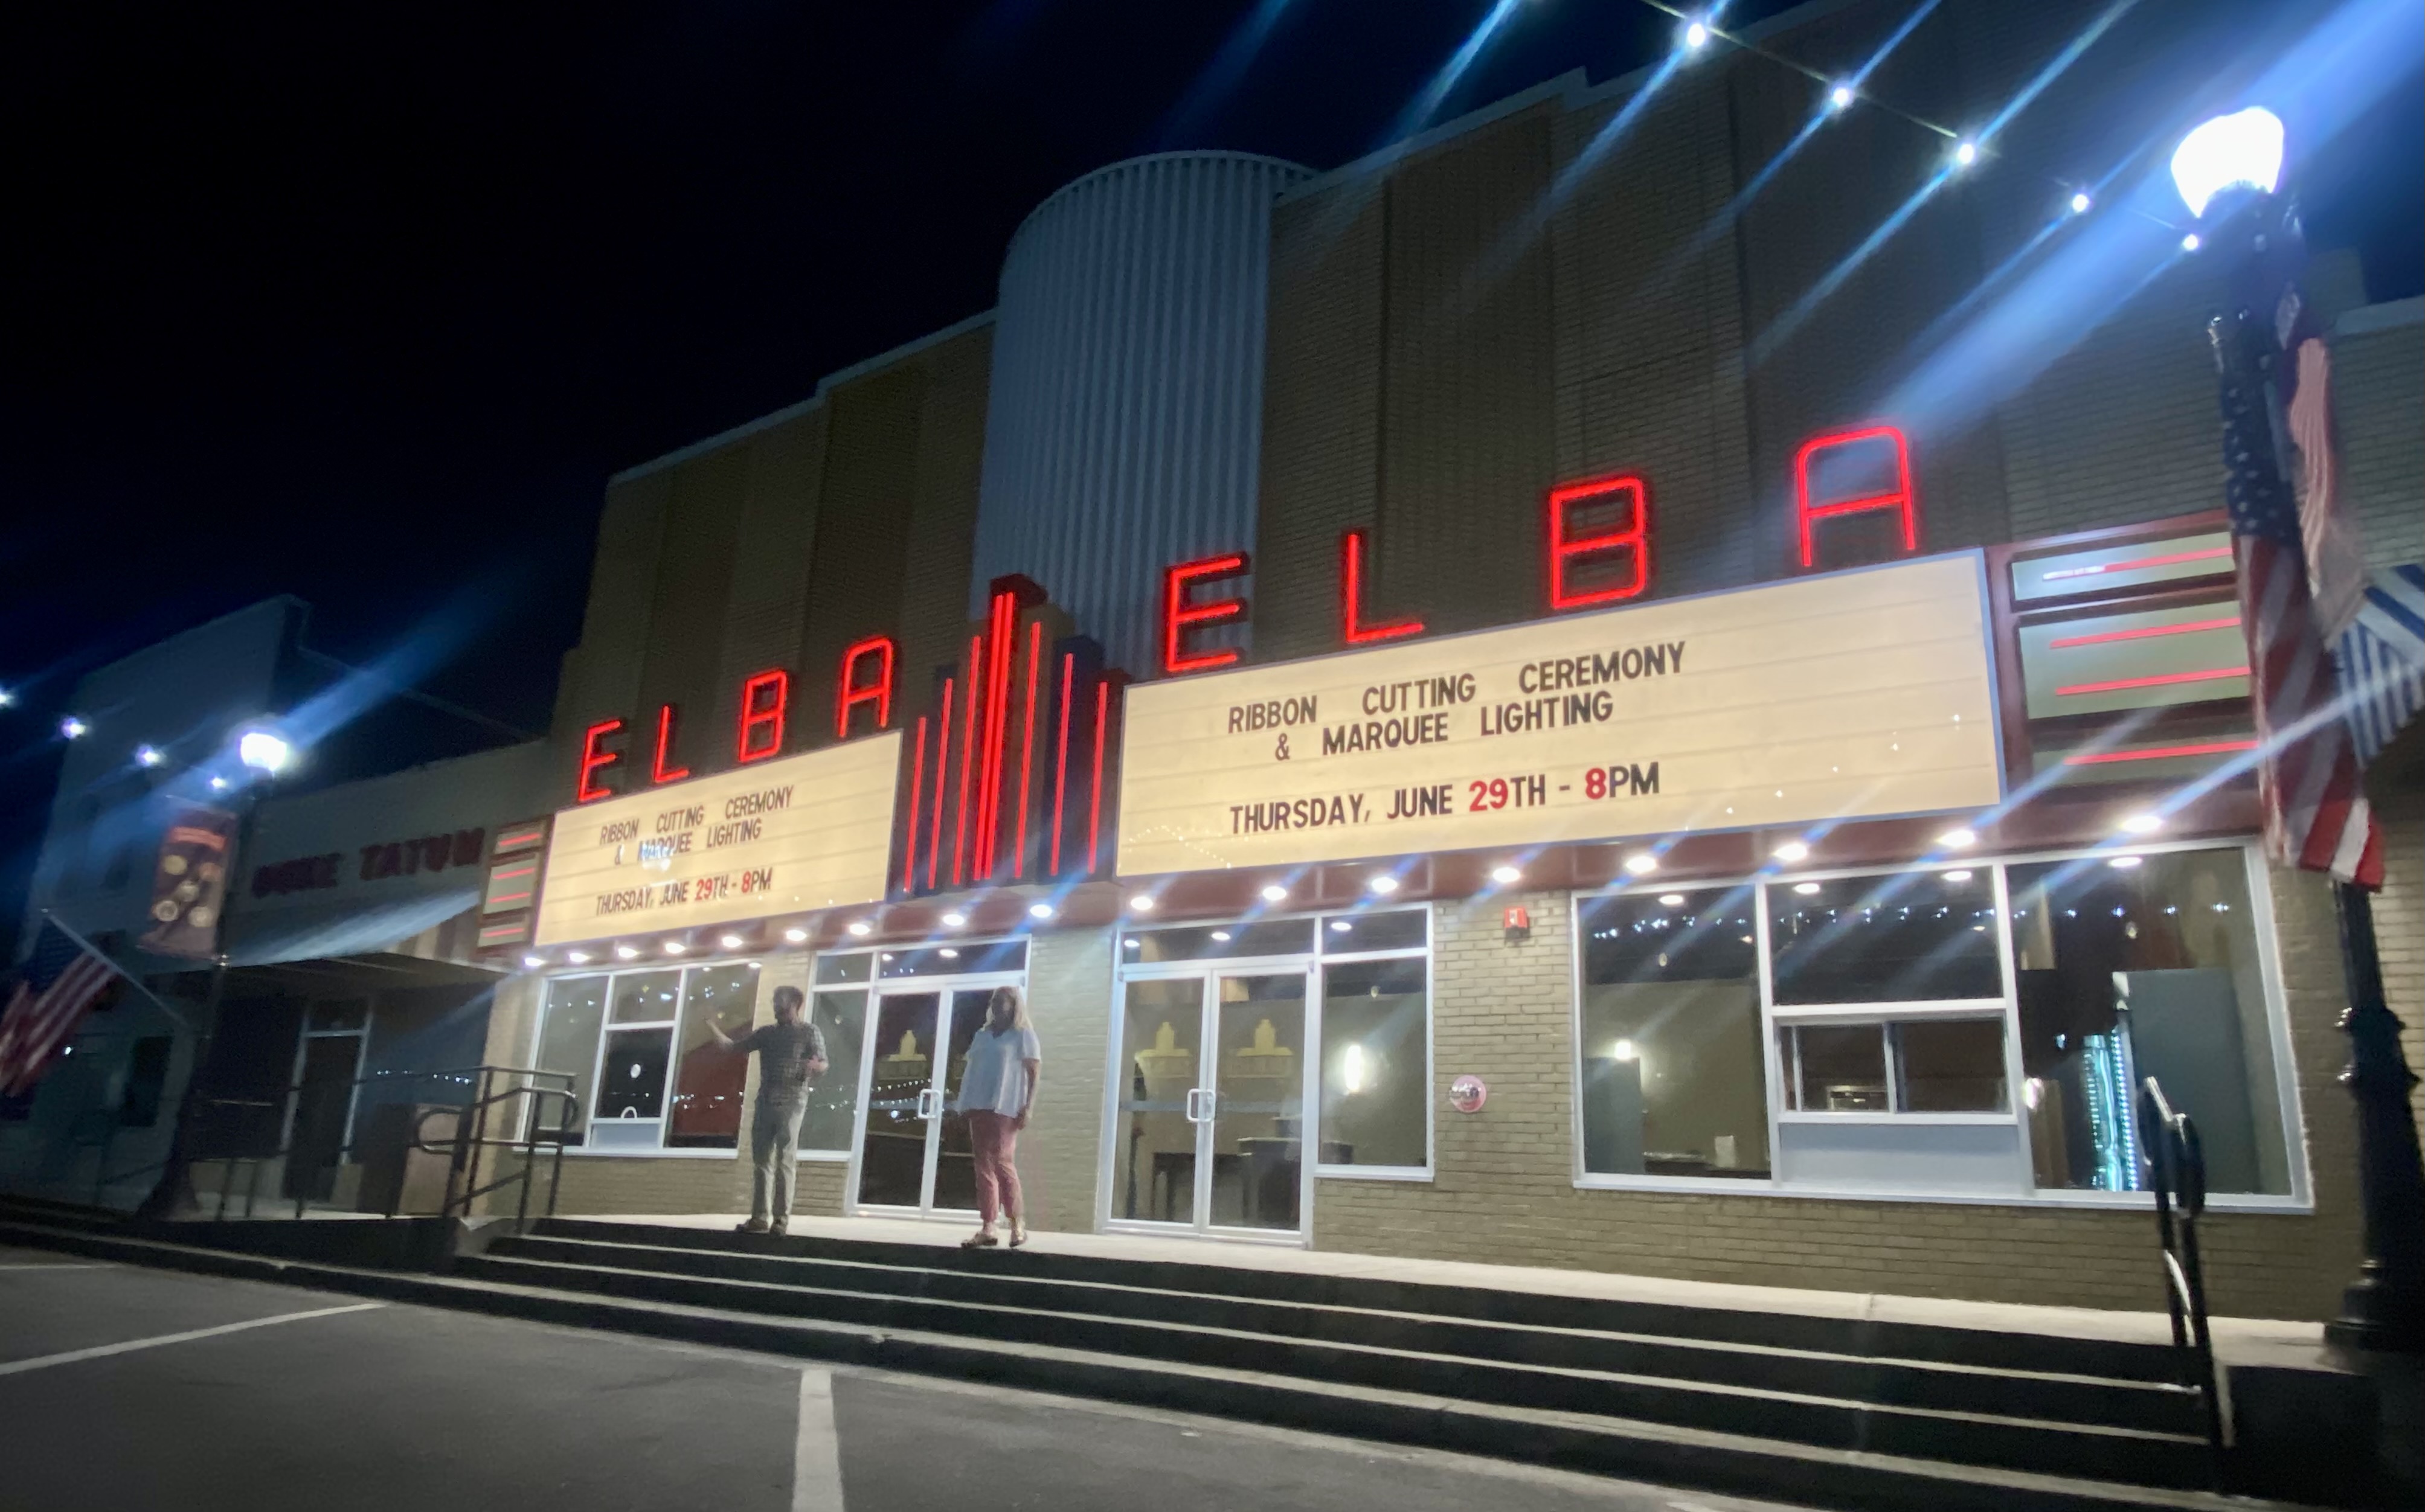 The Elba Theatre shines bright with red fluorescent lighting